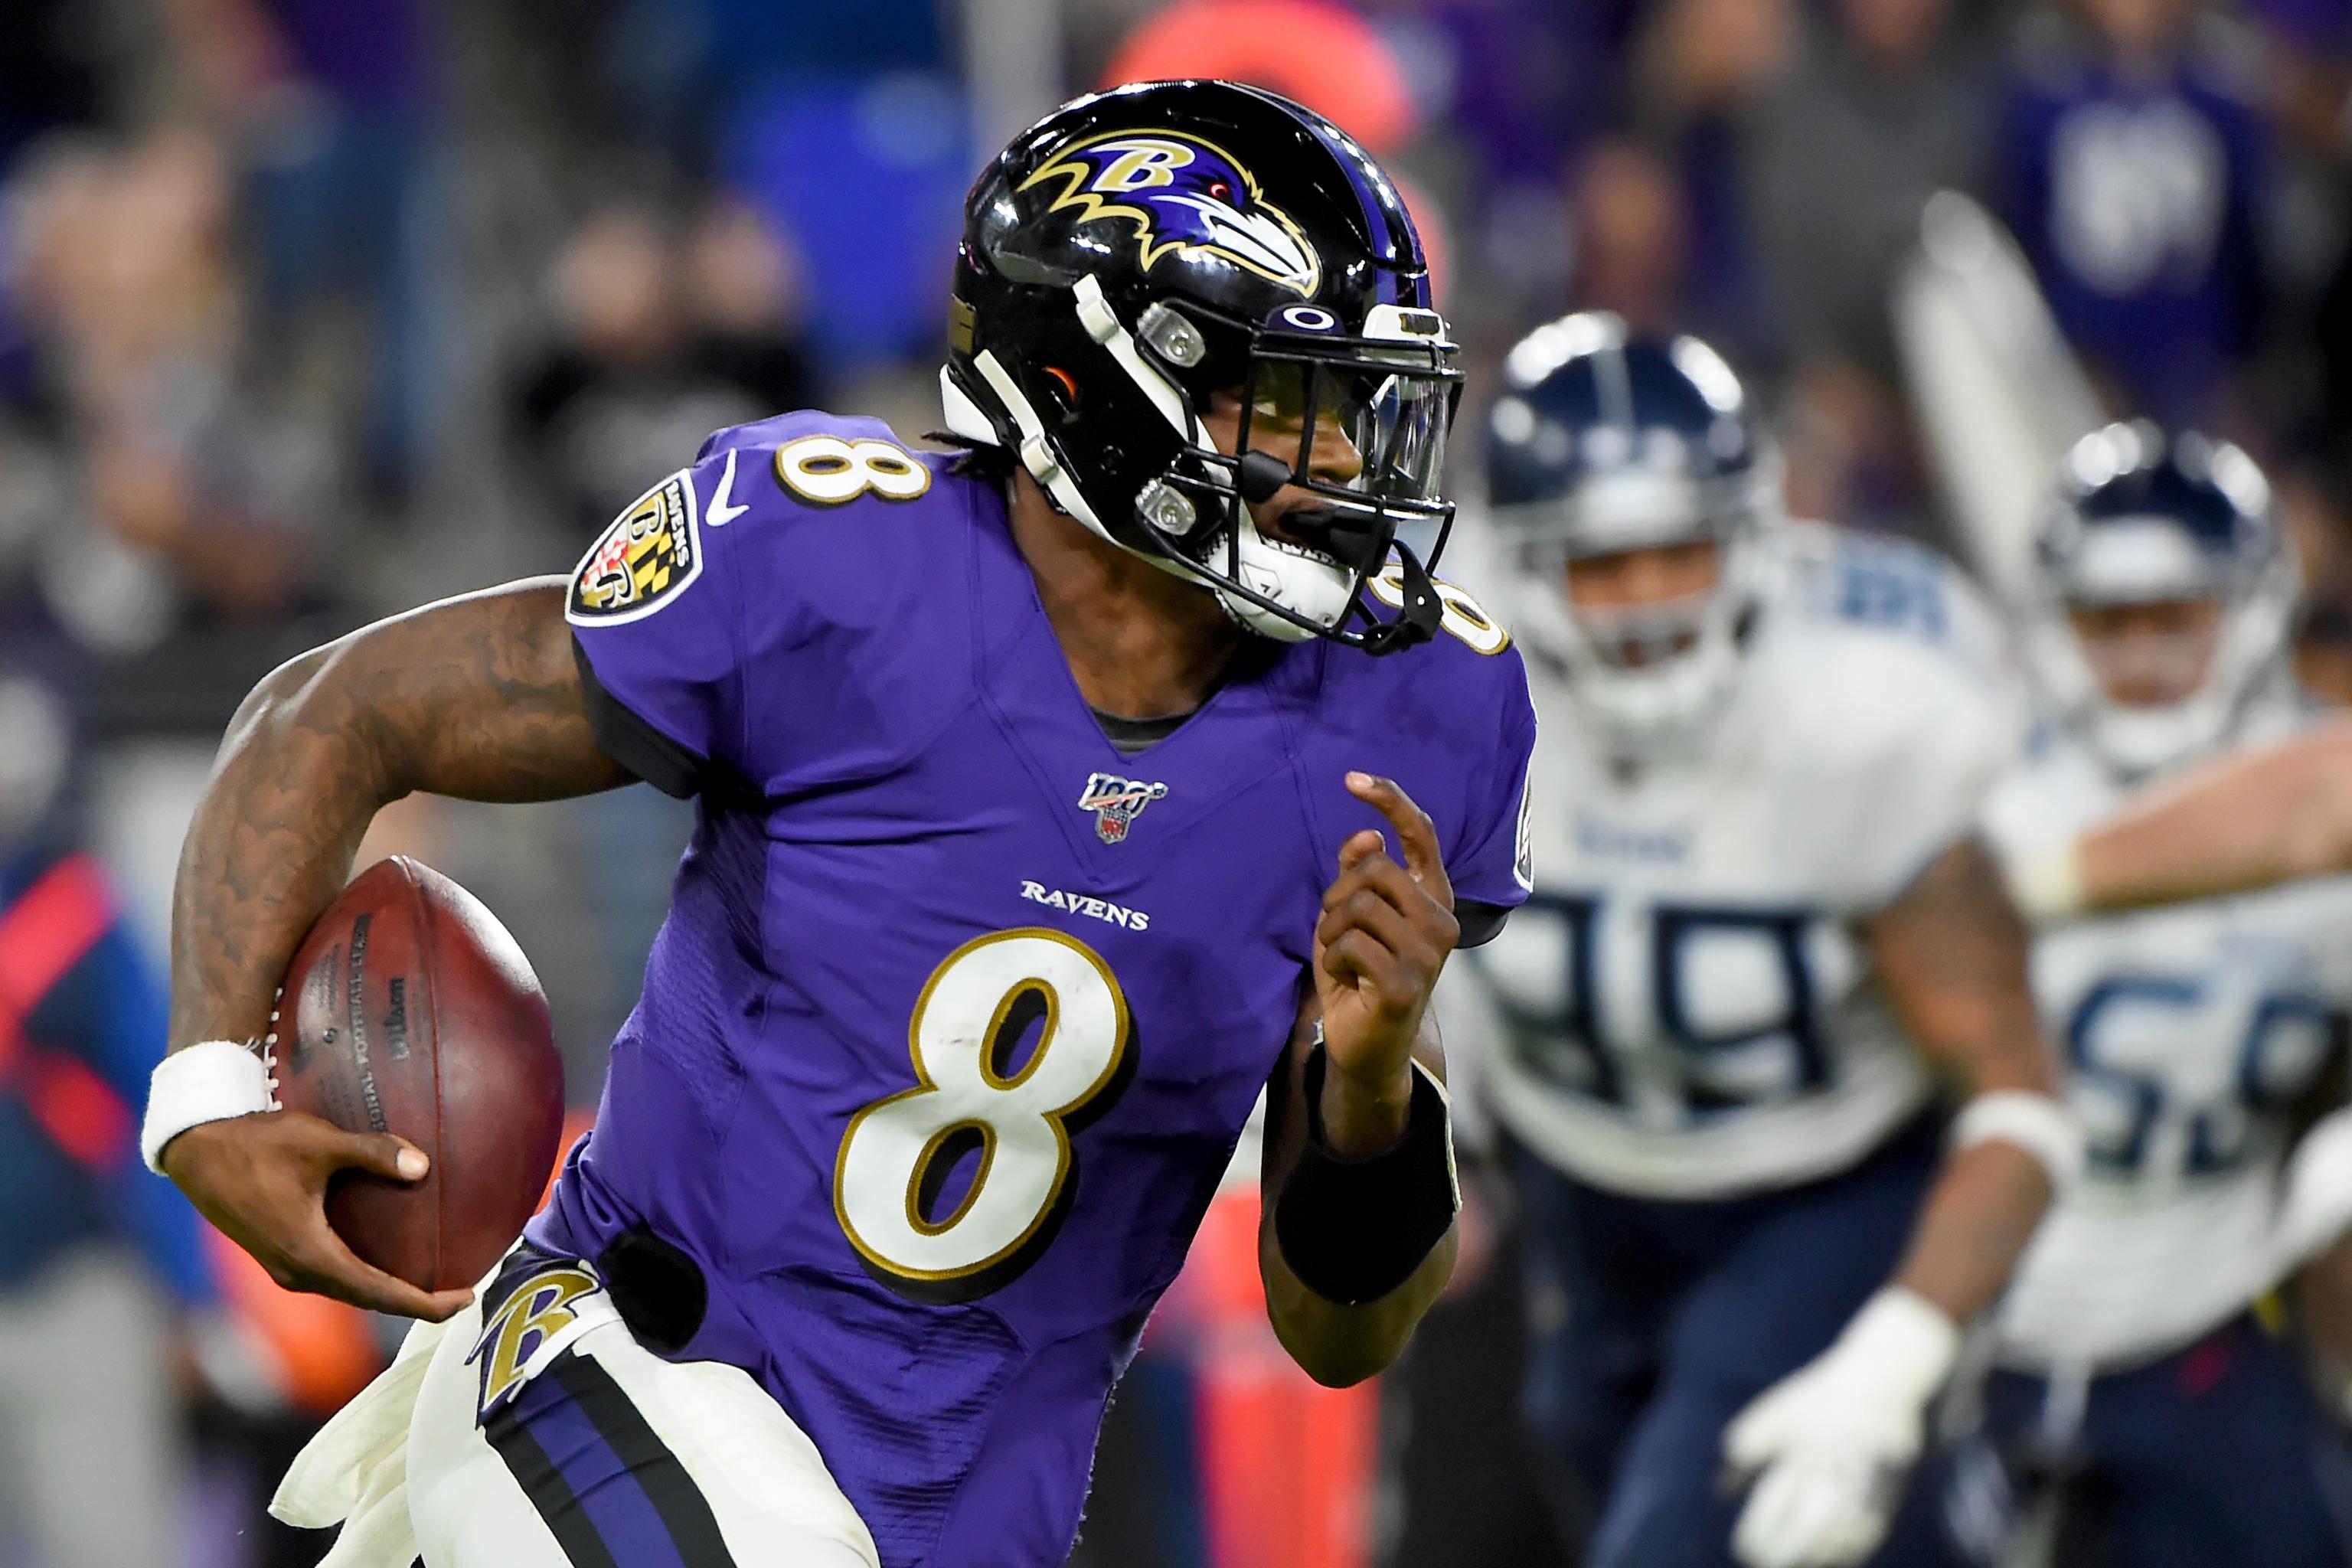 Ravens' Lamar Jackson Announces He Will Be Madden NFL 21 Cover